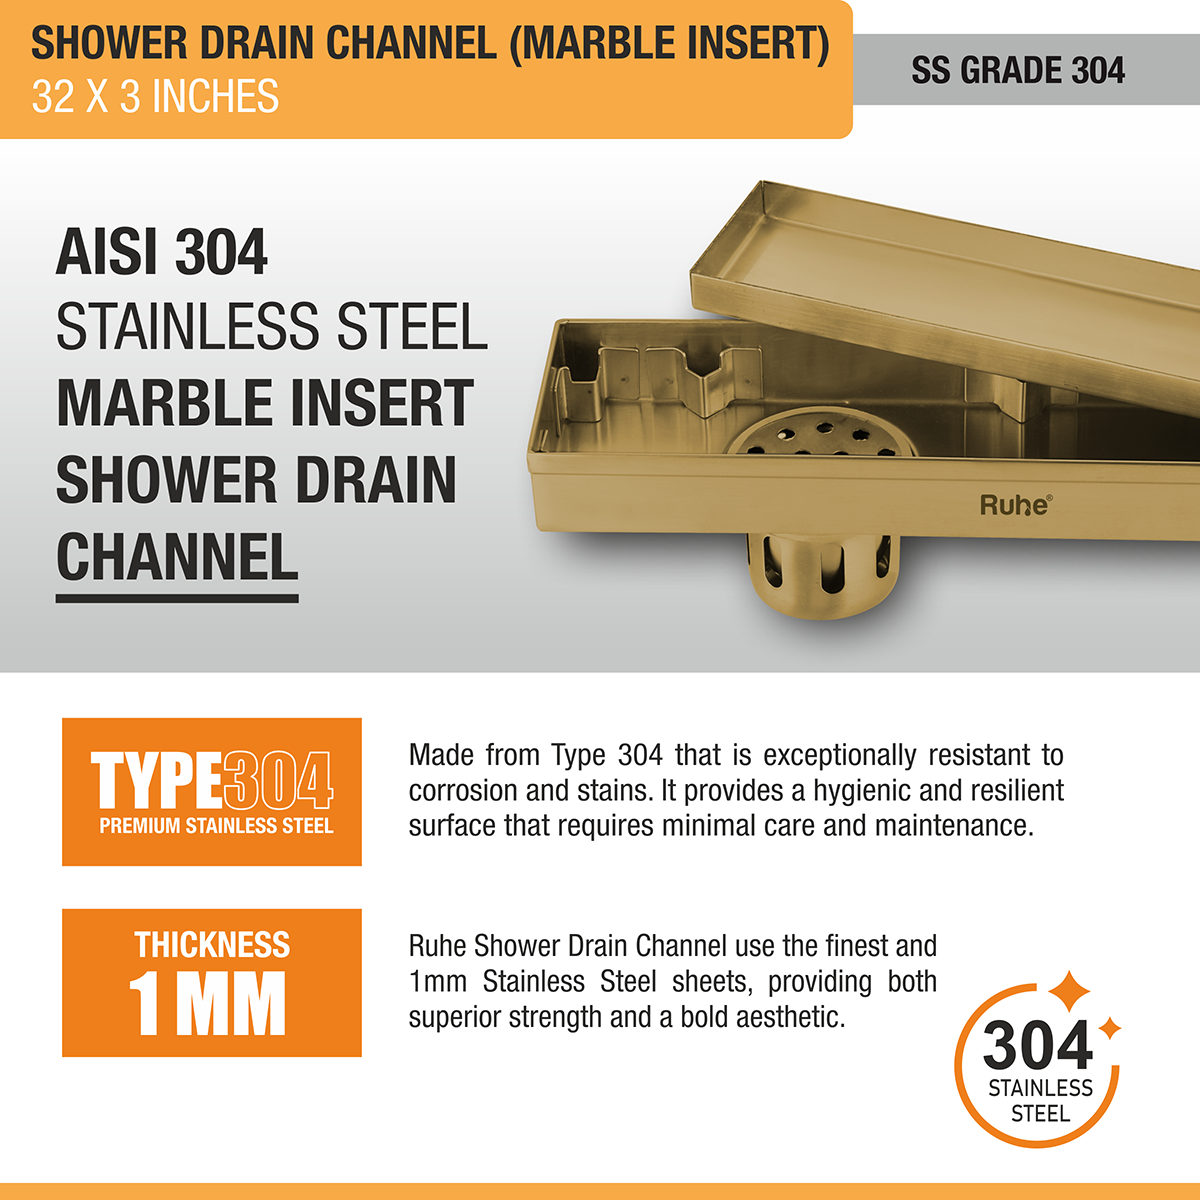 Marble Insert Shower Drain Channel (32 x 3 Inches) YELLOW GOLD PVD Coated stainless steel